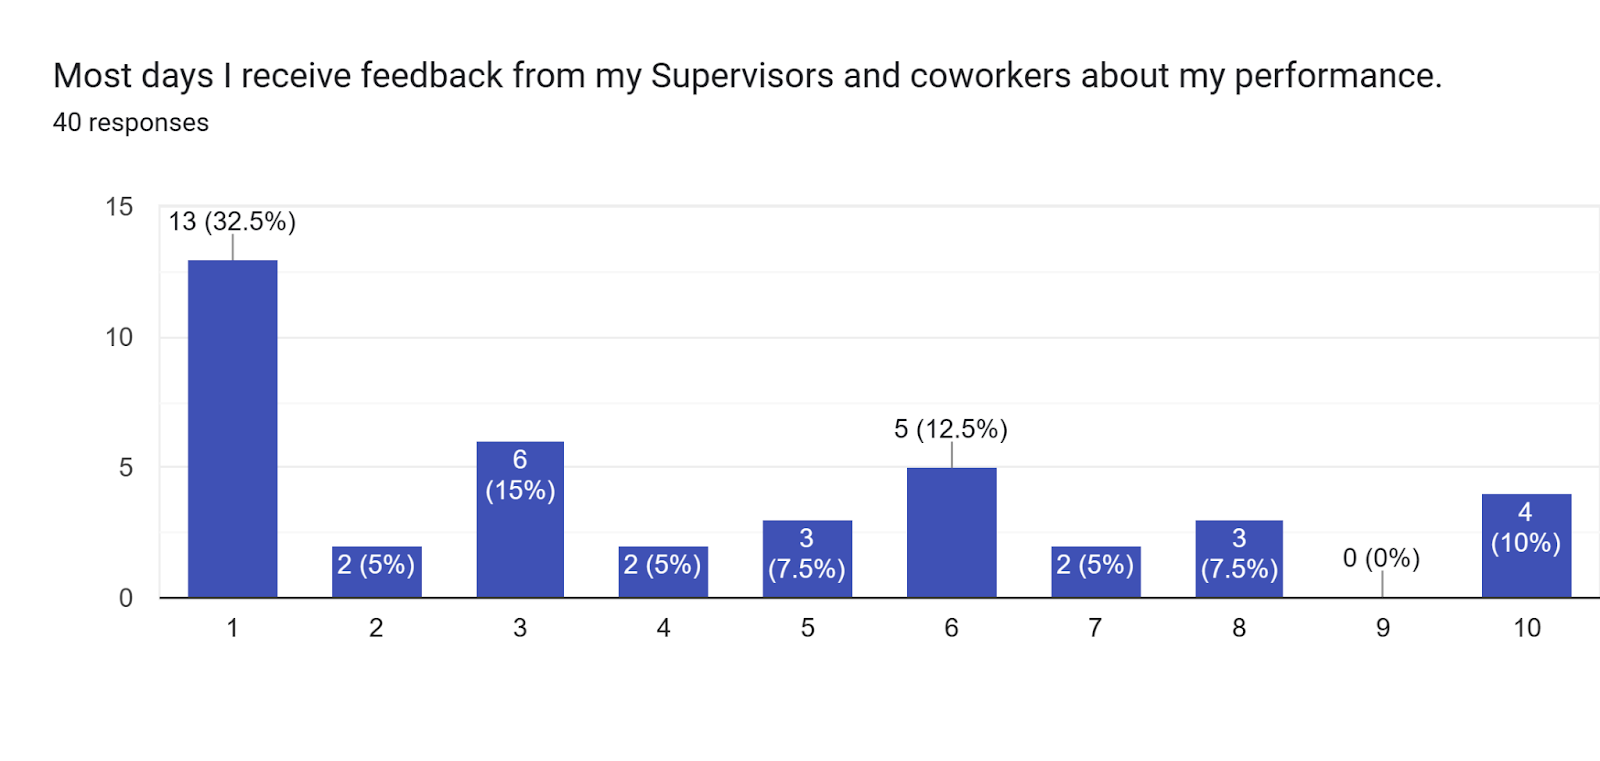 Forms response chart. Question title: Most days I receive feedback from my Supervisors and coworkers about my performance.. Number of responses: 40 responses.